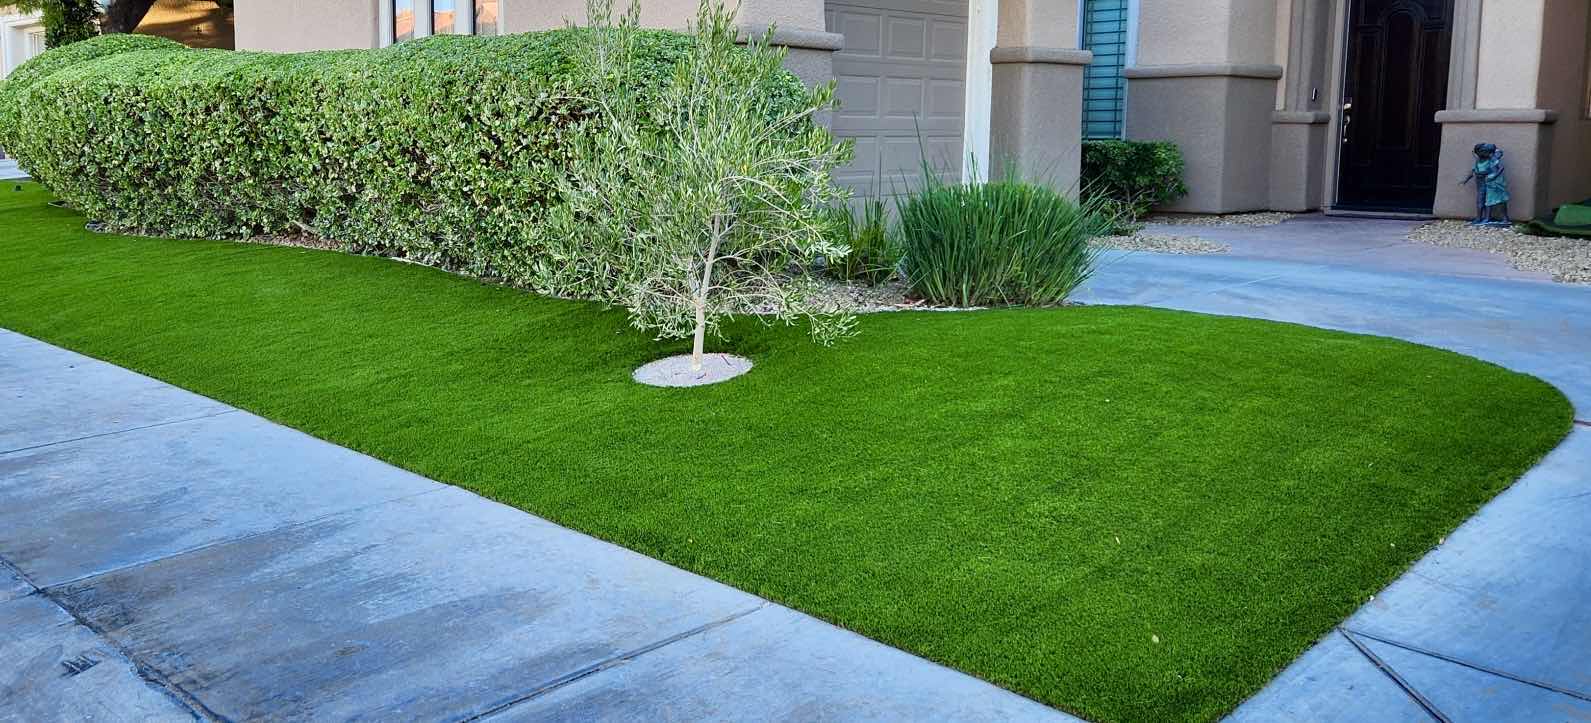 Photo 1 of SUPREME PREMIUM QUALITY ARTIFICIAL TURF GRASS 15’ X 100’ (1500 TOTAL SQ FT) ANTHEM COUNTRY CLUB APPROVED TOTAL TURF HEIGHT 1.97”- (Pickup Sun June 2nd & Mon June 3rd)